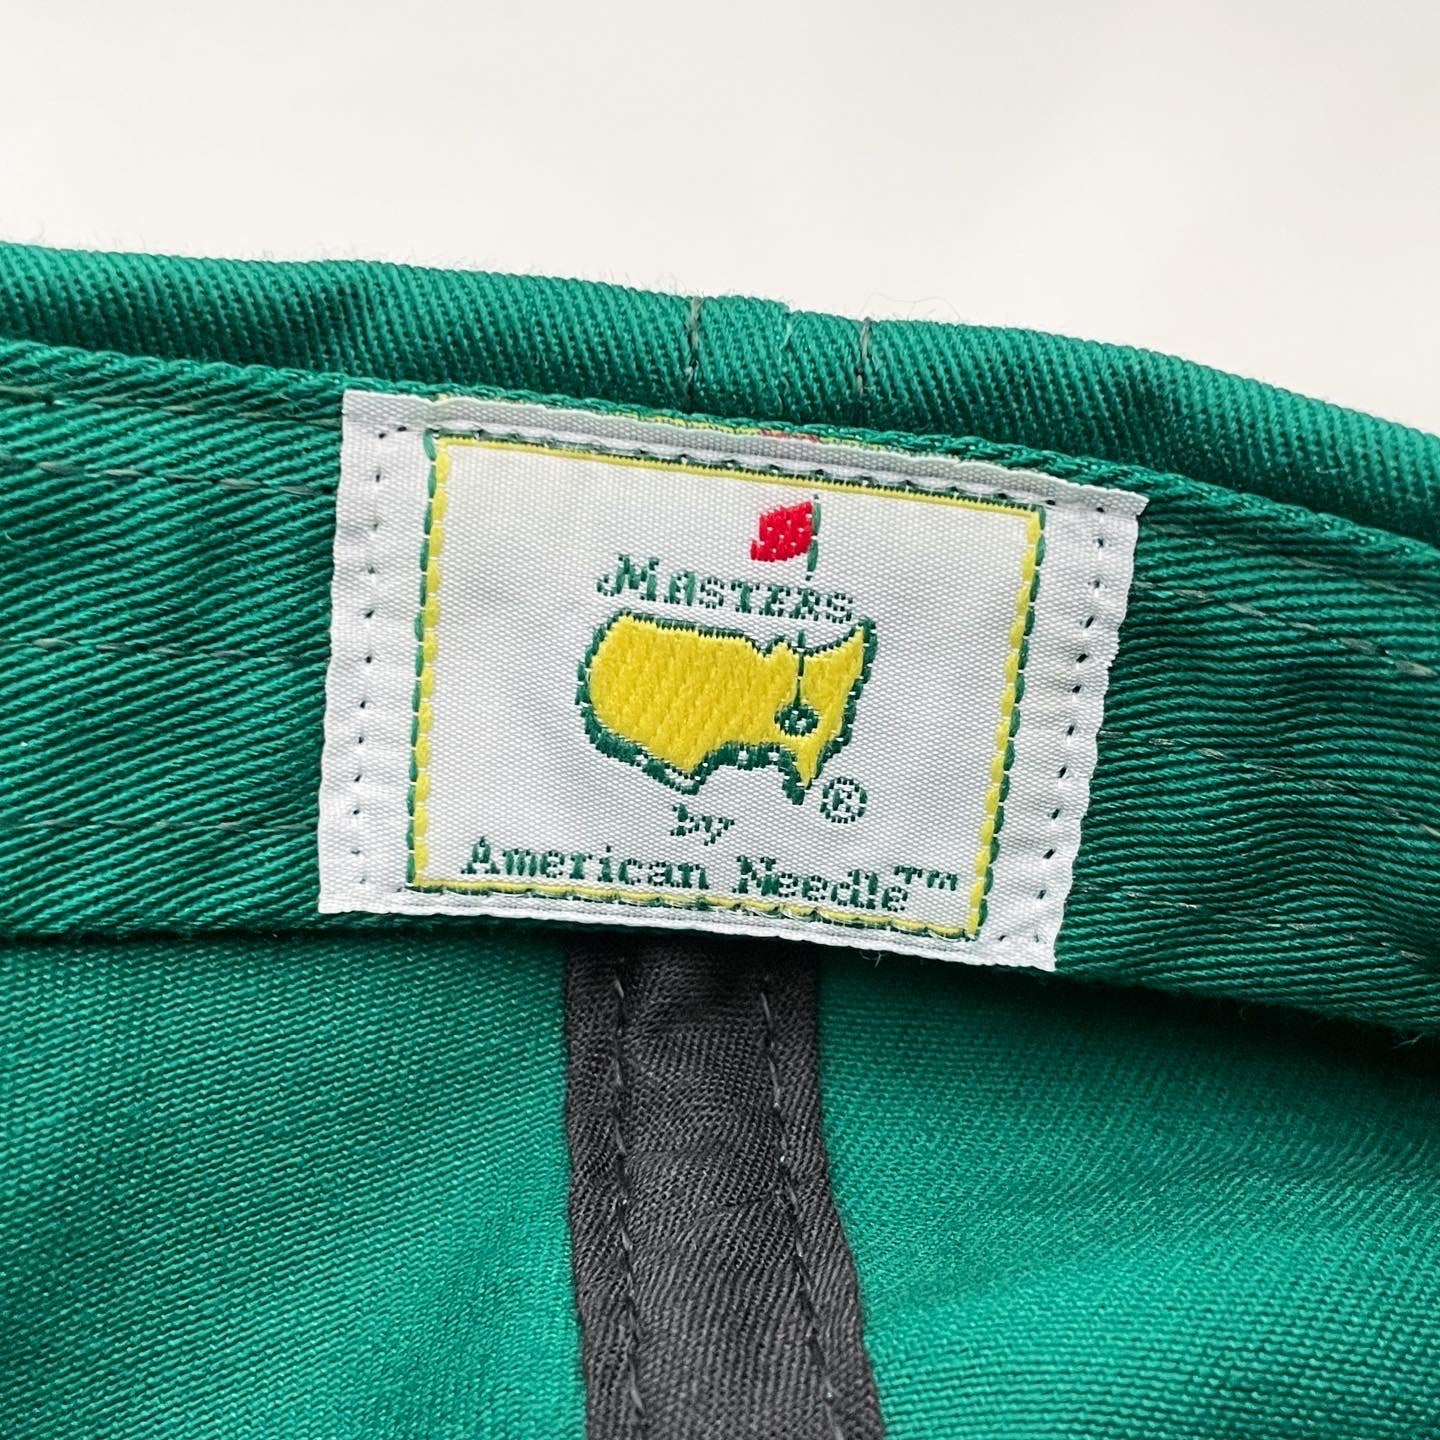 Masters 2000 Hat by American Needle™️